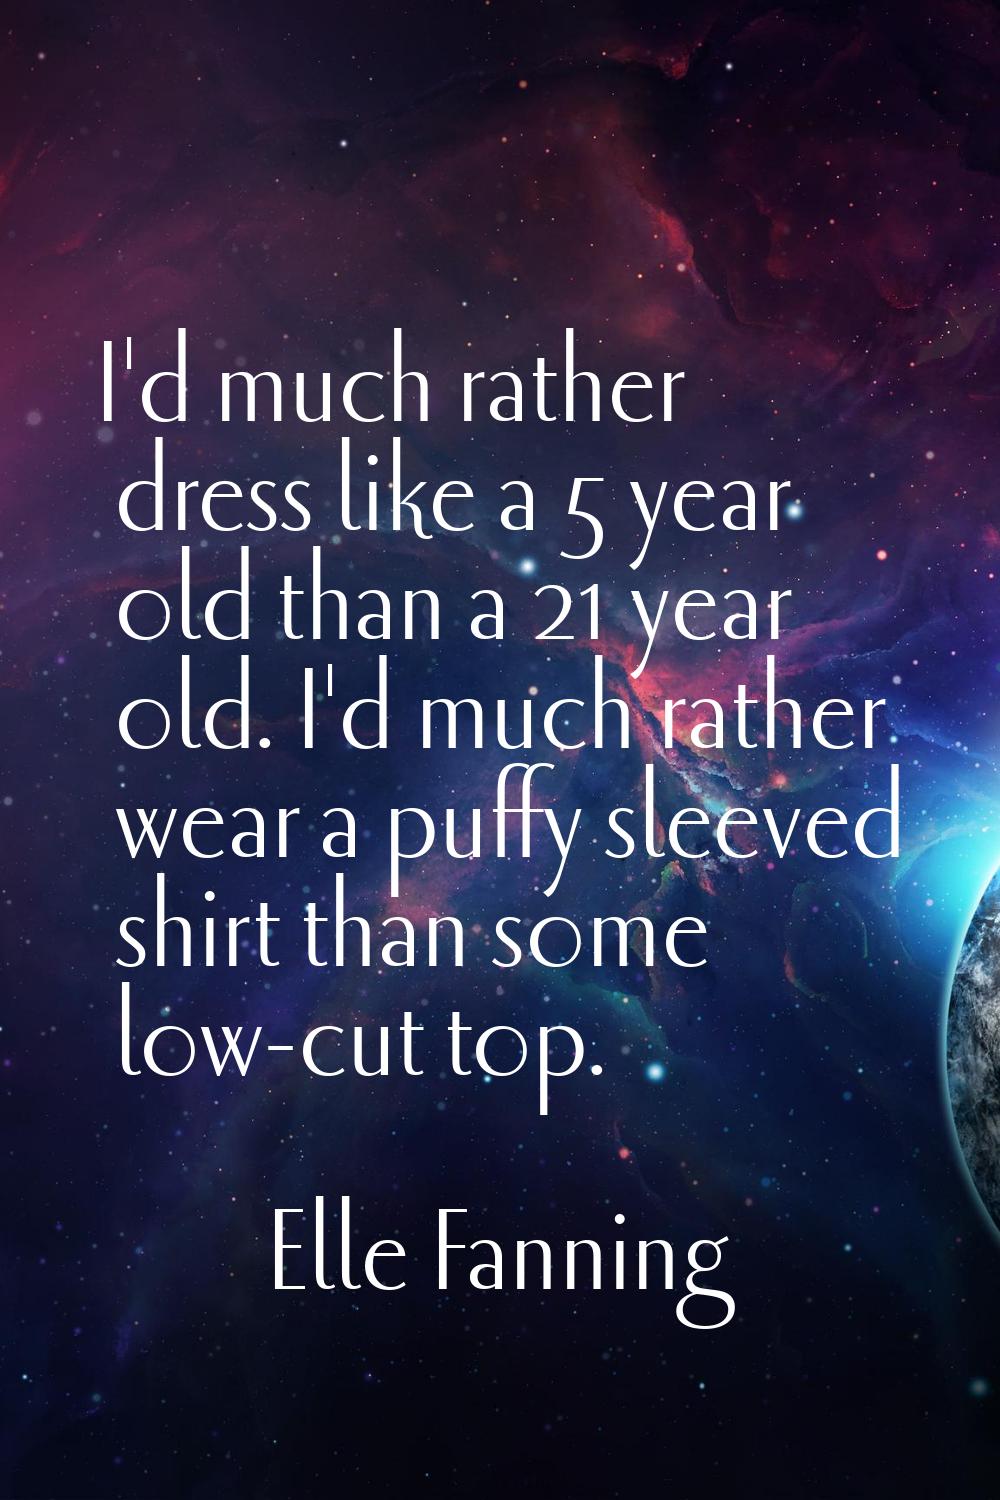 I'd much rather dress like a 5 year old than a 21 year old. I'd much rather wear a puffy sleeved sh